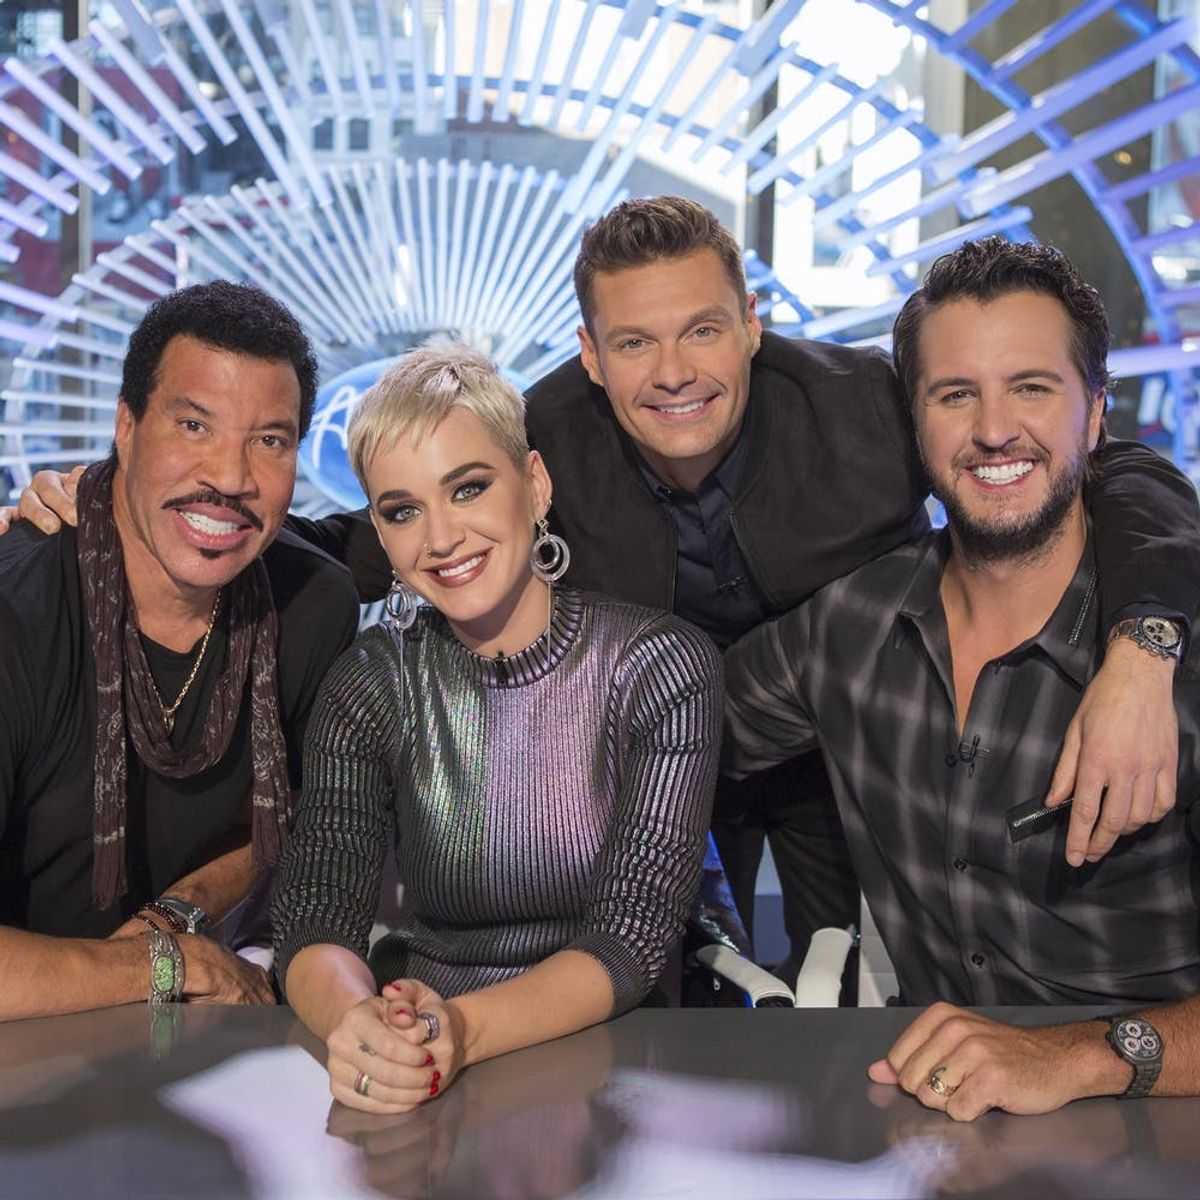 The ‘American Idol’ Reboot Will Be Different from the Original in One Key Way